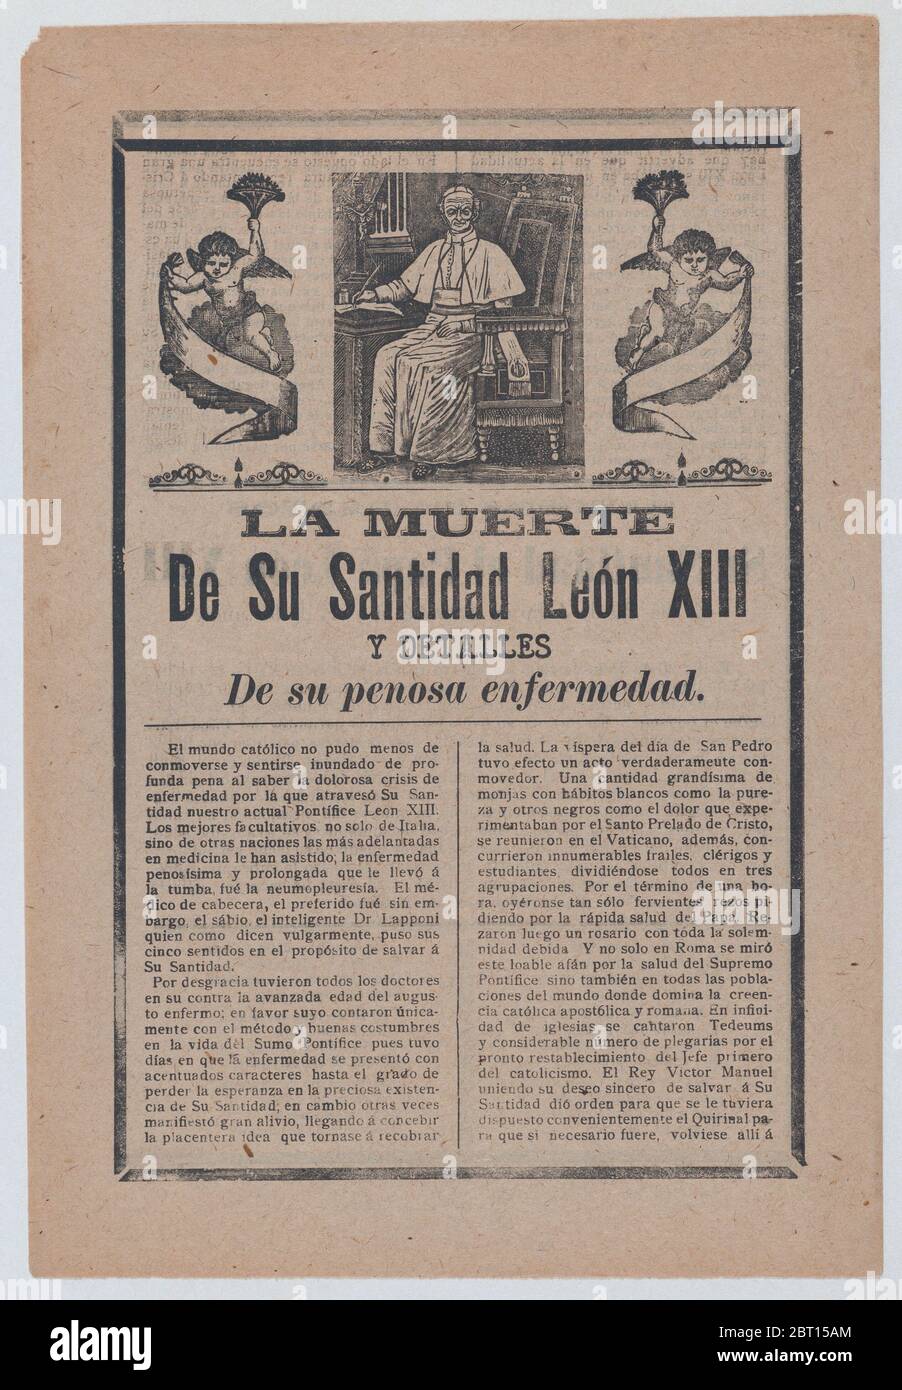 Broadsheet relating to the death of Pope Leo XIII, he is shown in his study flanked by angels, ca. 1900-1913. Stock Photo